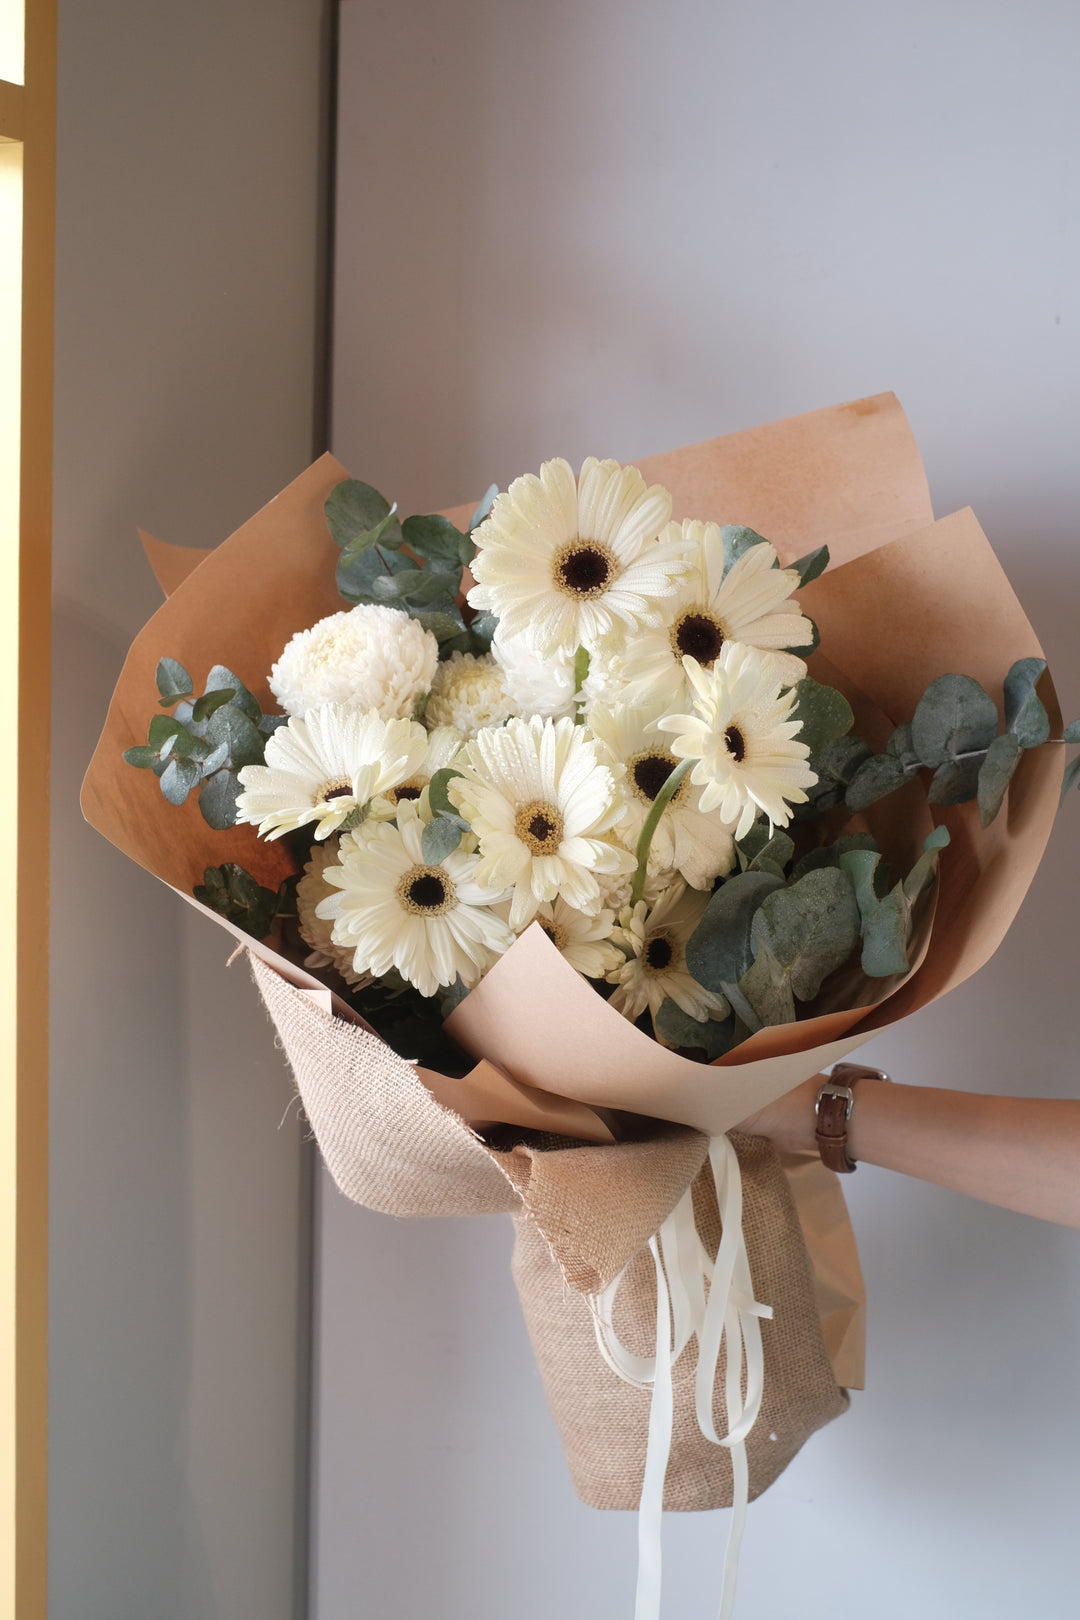 Let these beautiful flowers help you express your feelings and say farewell to a loved one at this sad time. For same day condolences flowers delivery in Penang.